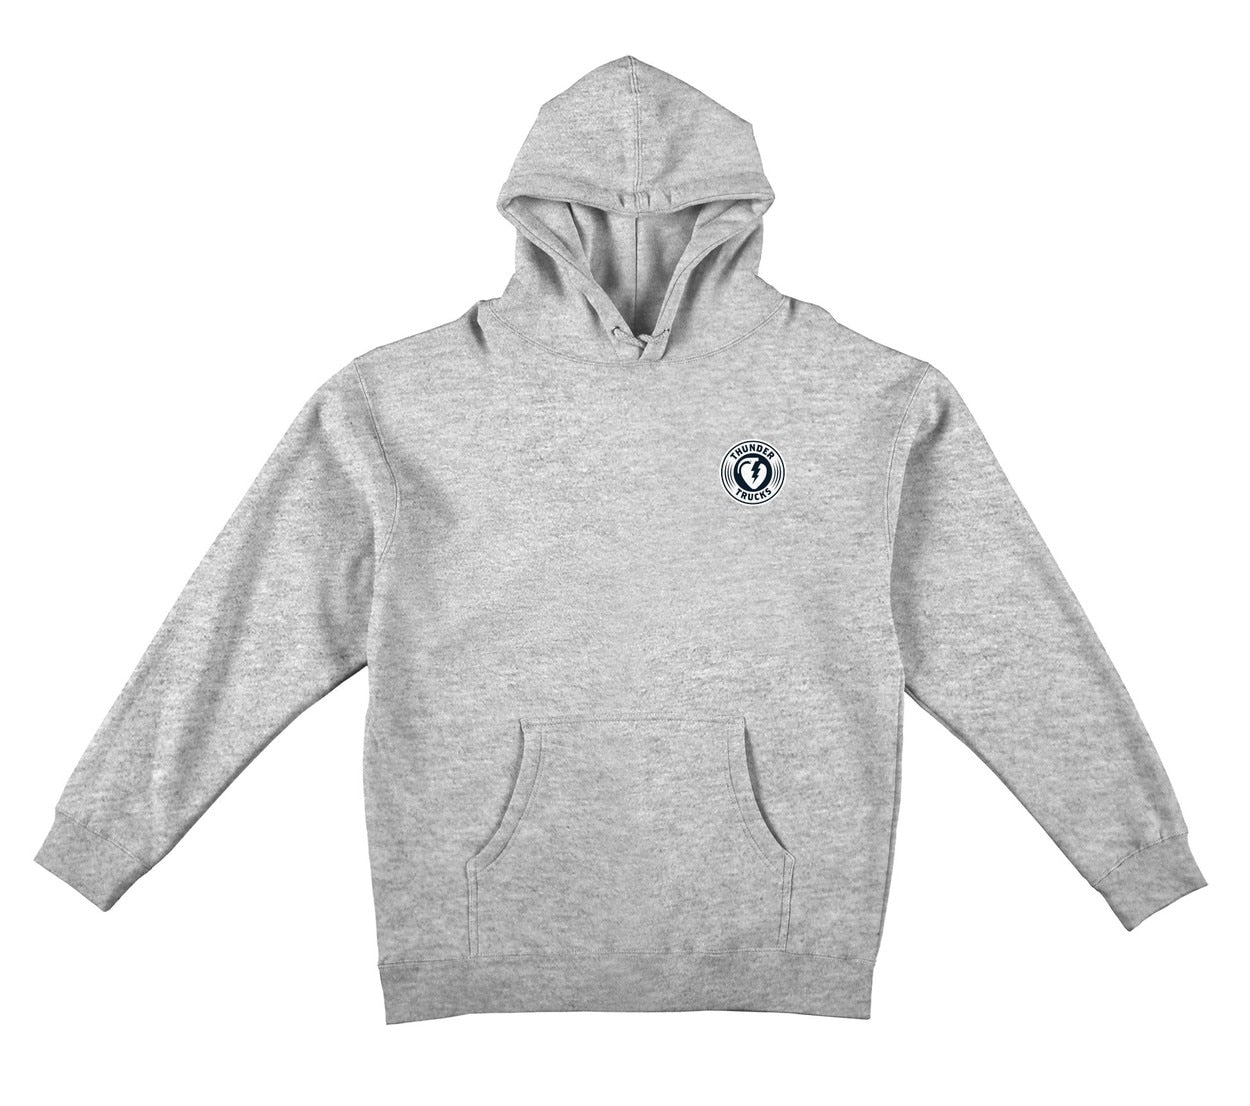 Thunder Charged Grenade Pullover Hoodie - Grey Heather/White